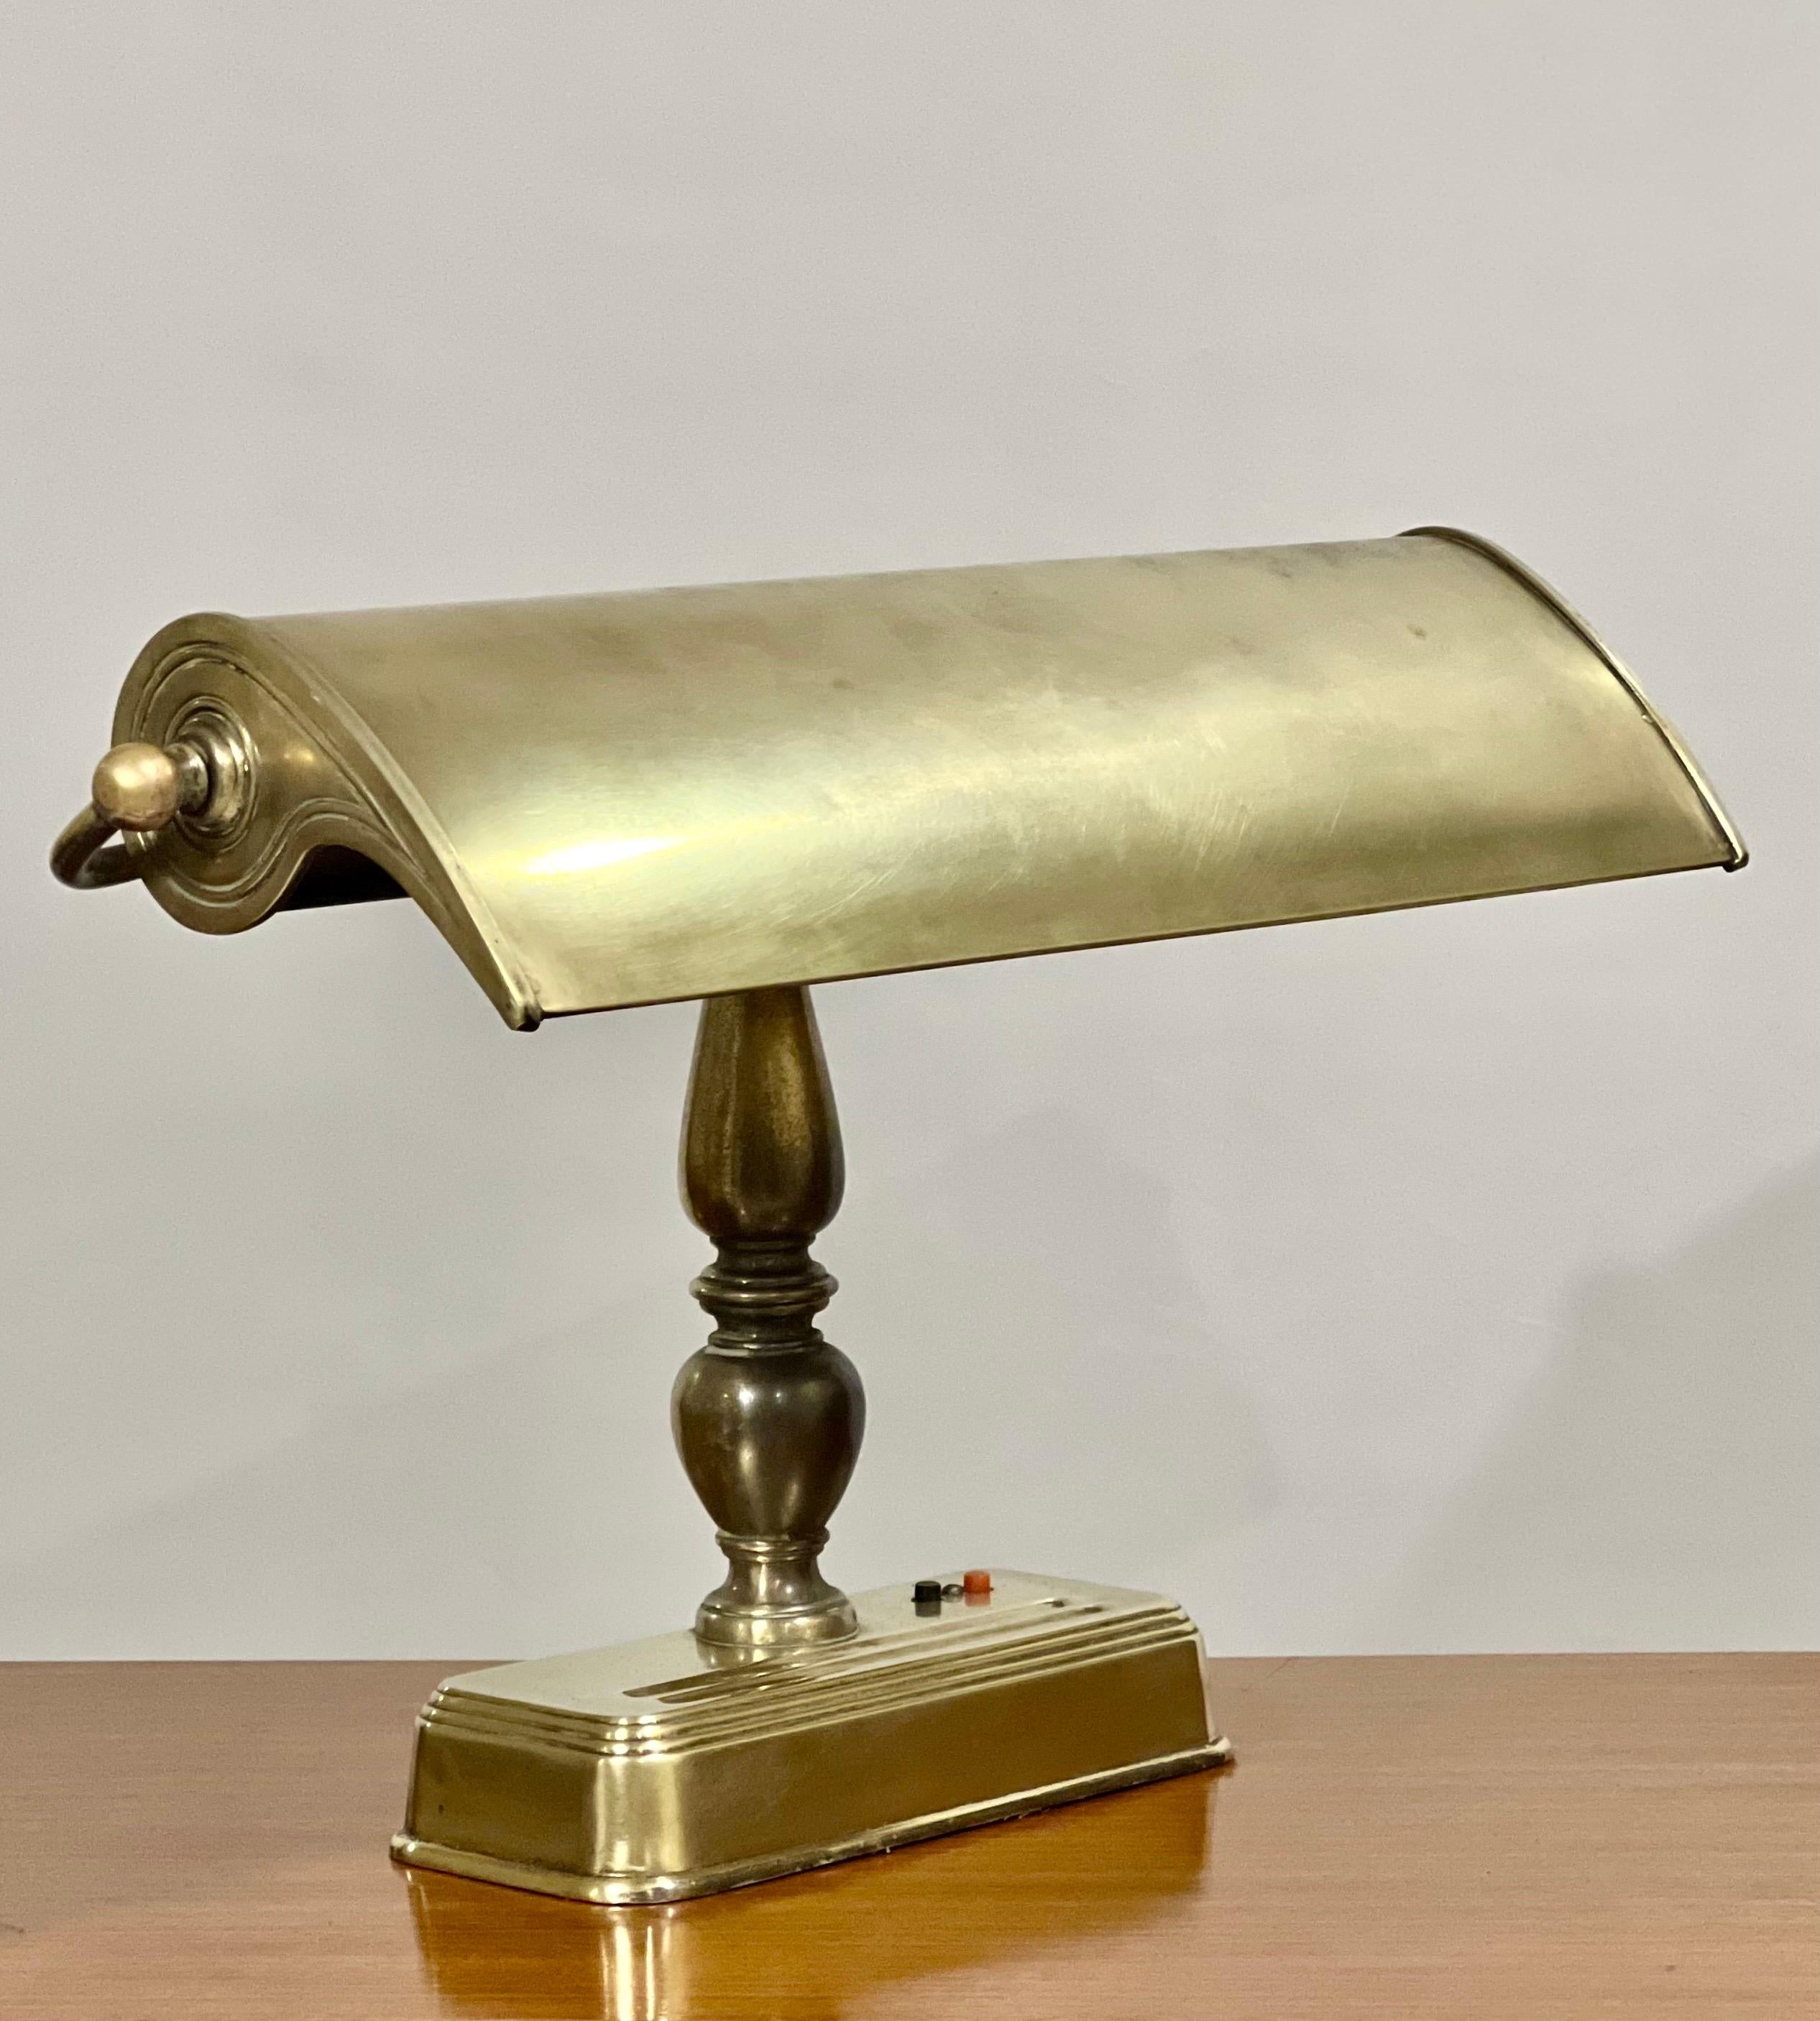 Large bankers desk lamp with adjustable shade, circa 1950's.

This is an impressive lamp with great design . A balustrade form pedestal supports an adjustable shade with a white enamel underside and a single tube light fitting. (It currently has a